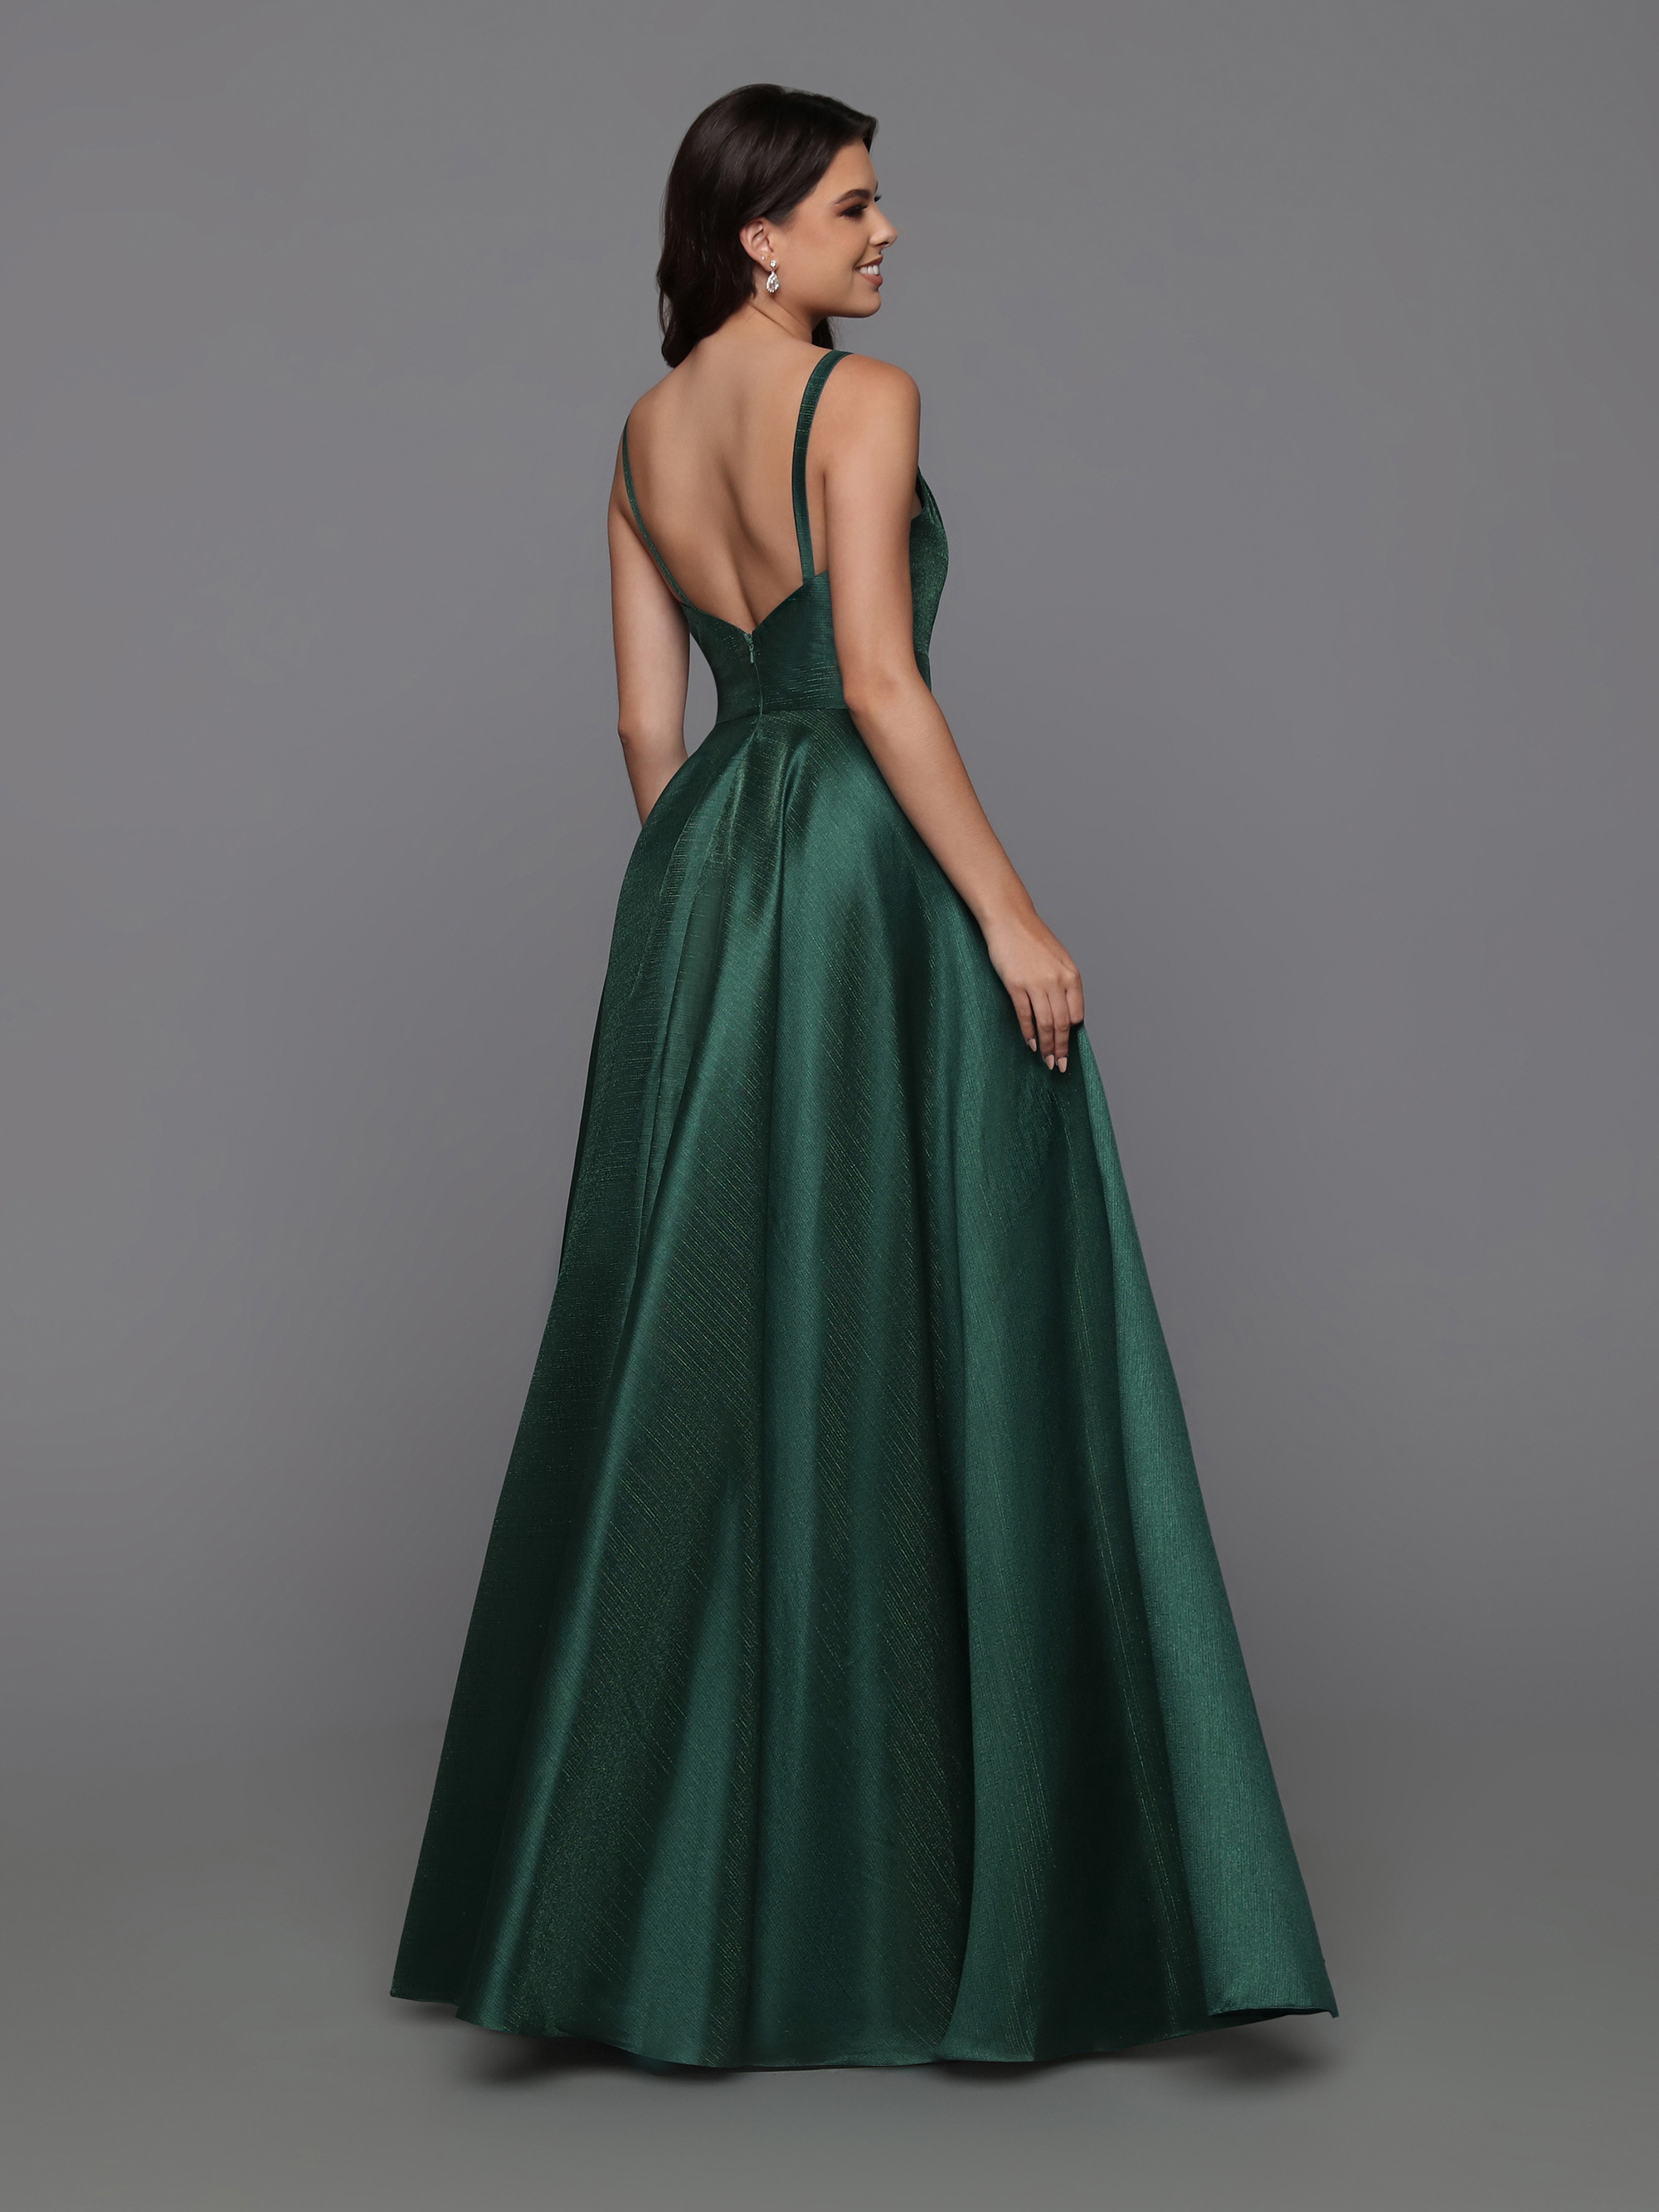 Image showing back view of style #72228